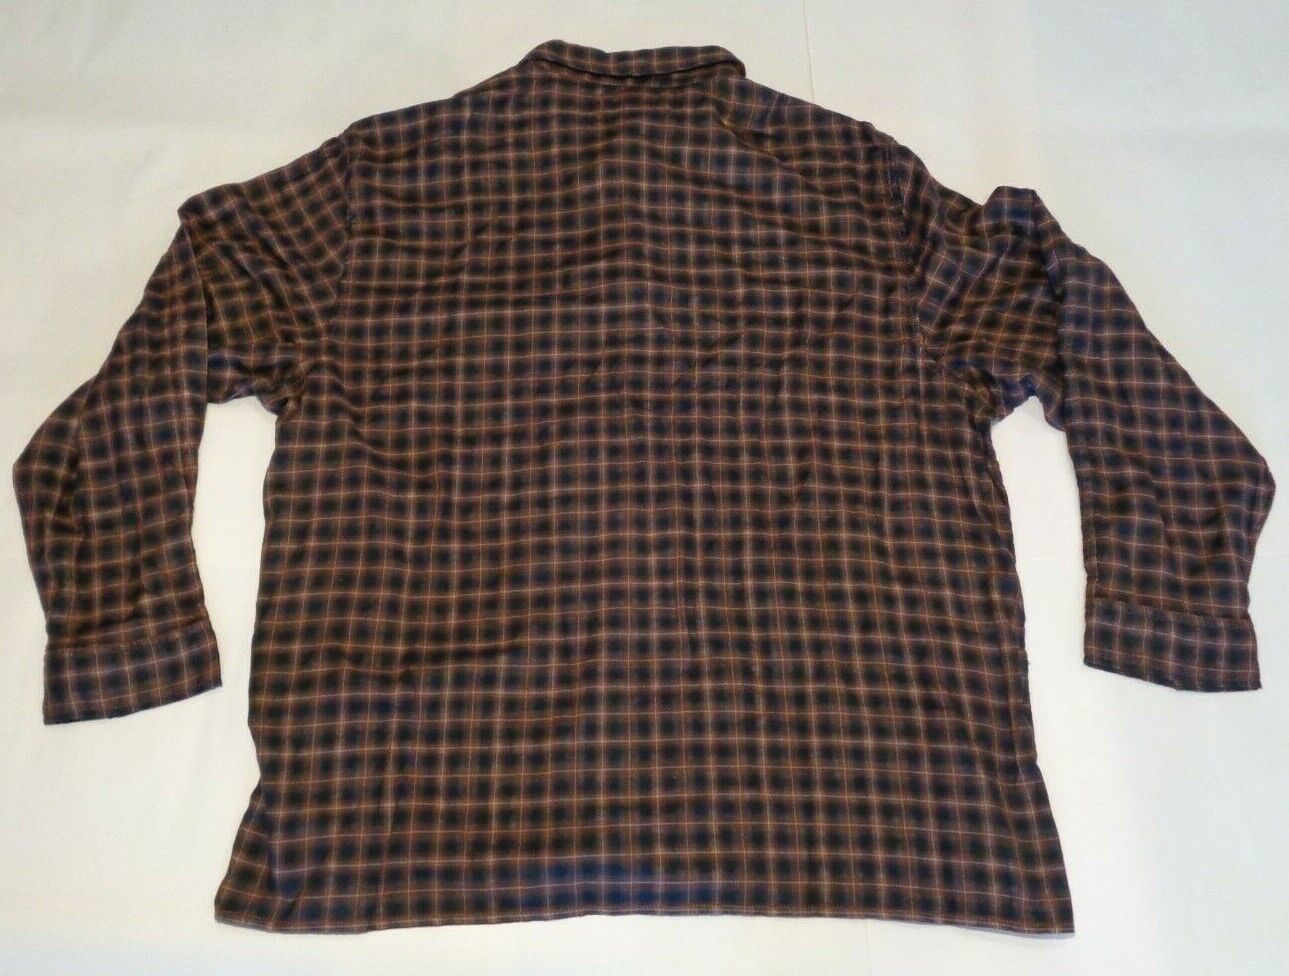 Primary image for Vertical Robert Comstock Size 2X Plaid Brown Cotton New Men's Button Down Shirt